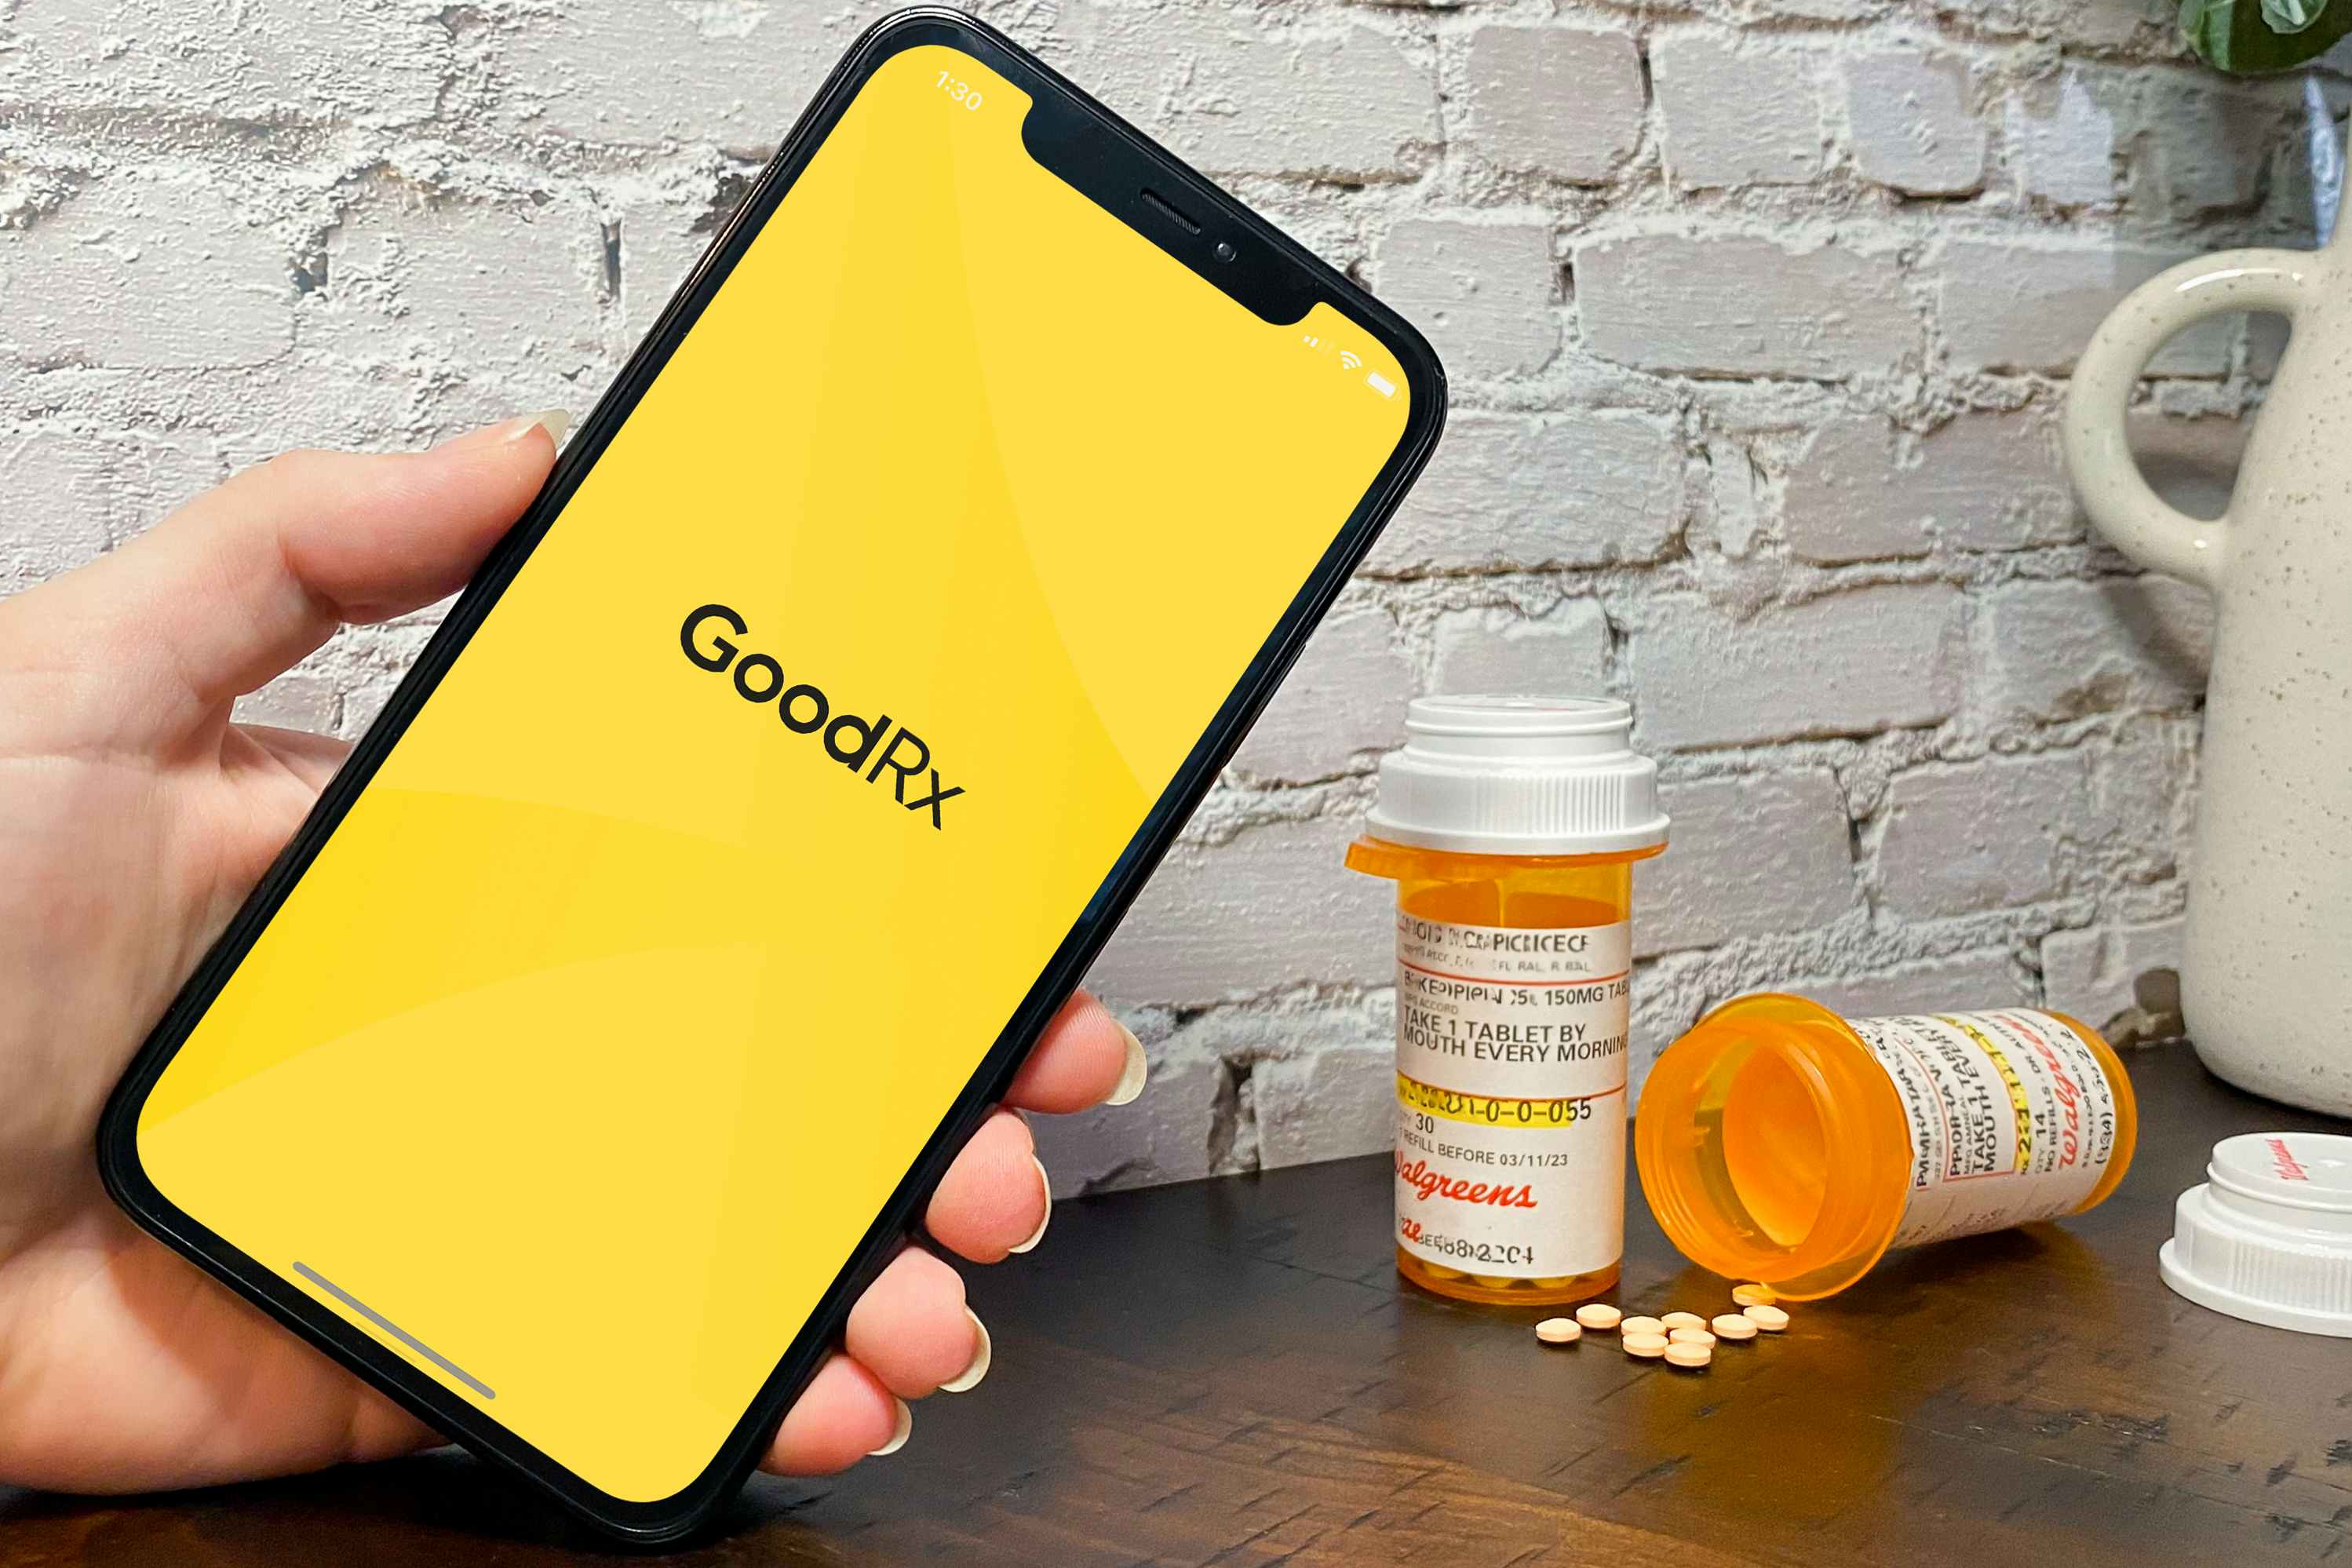 Someone holding up a phone displaying the GoodRX app launch screen with some prescription medication on a table in the background